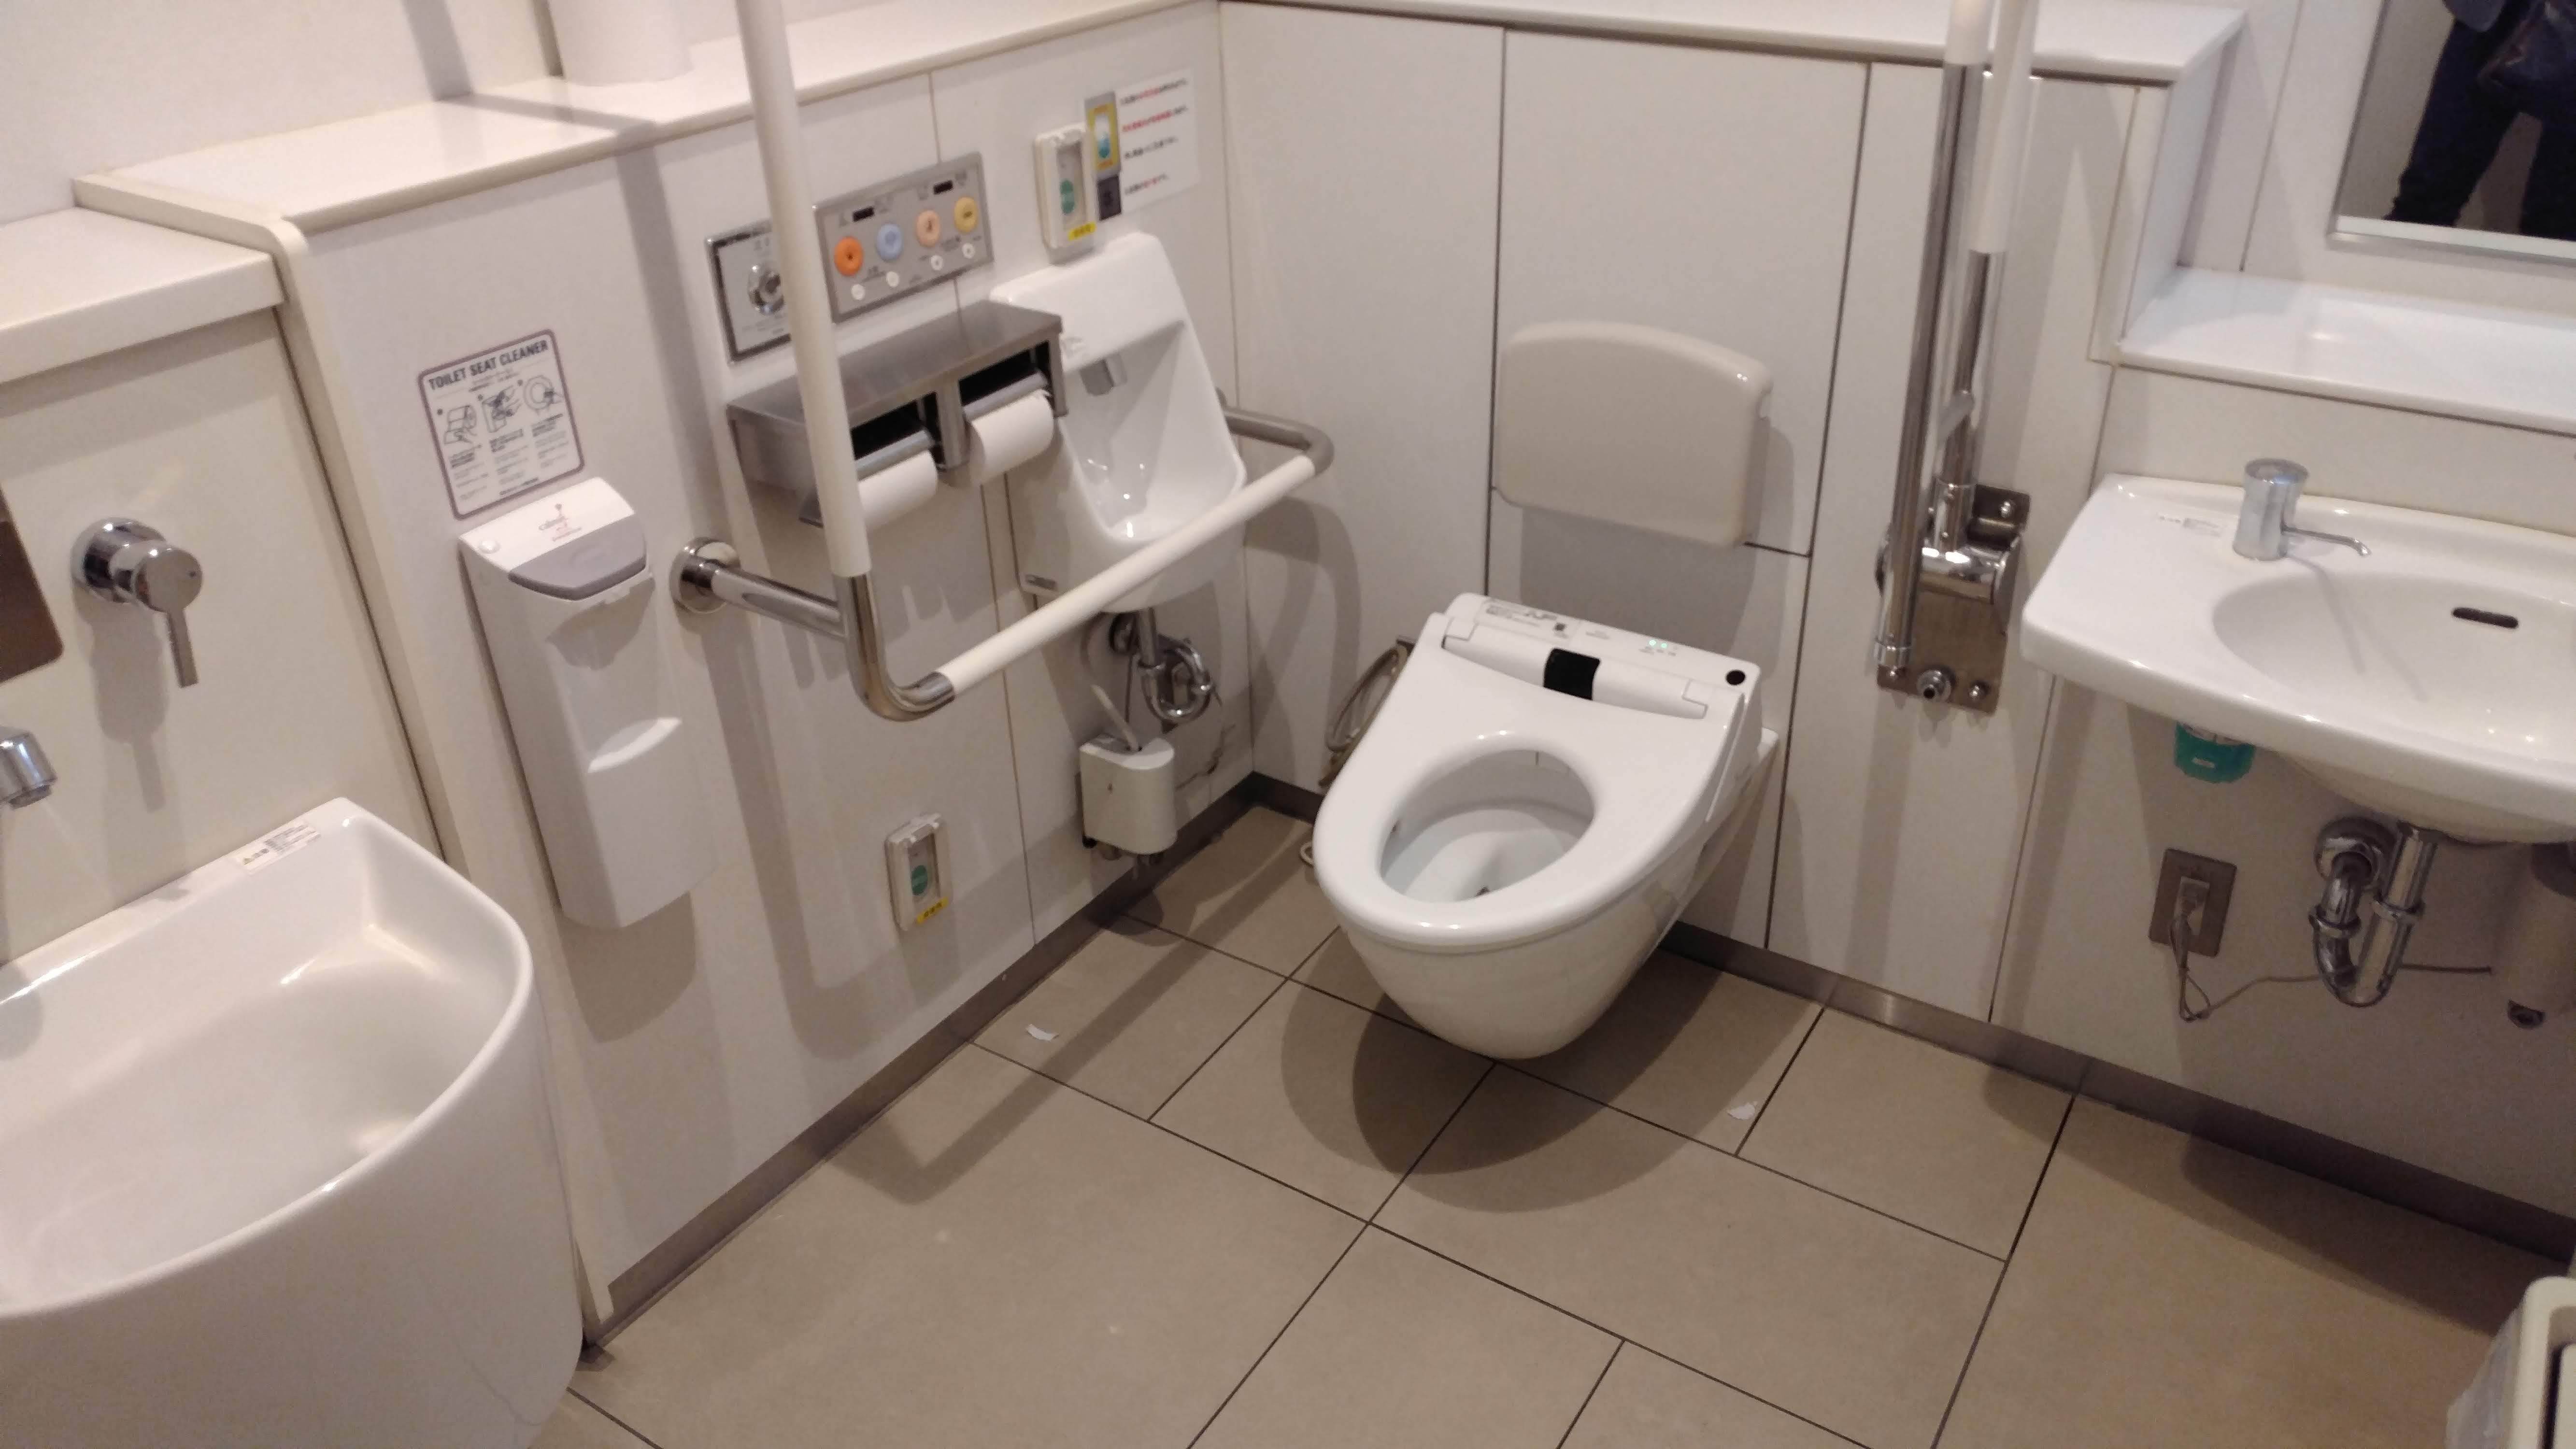 roomy public bathroom with many accessibility features